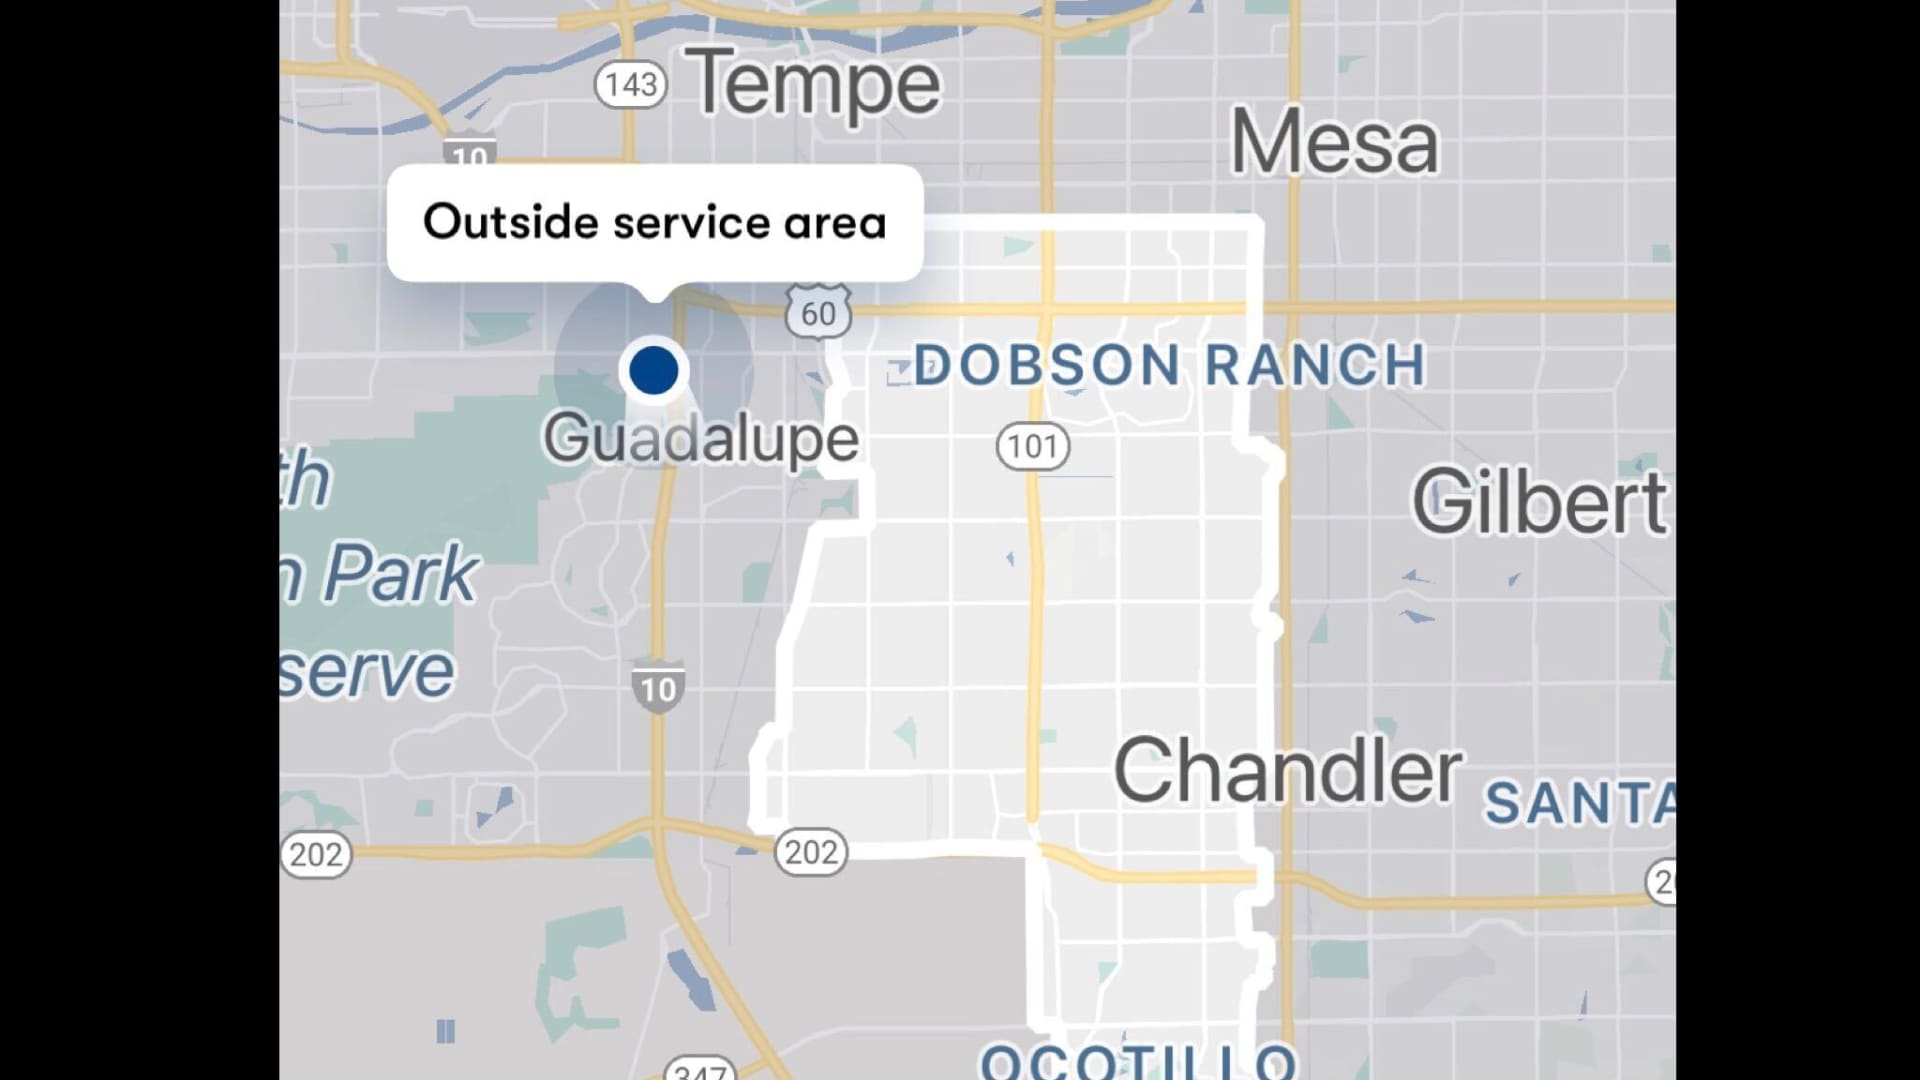 The Waymo One app shows a map of the company's limited service area in the Phoenix region for the user to see before ordering a vehicle.